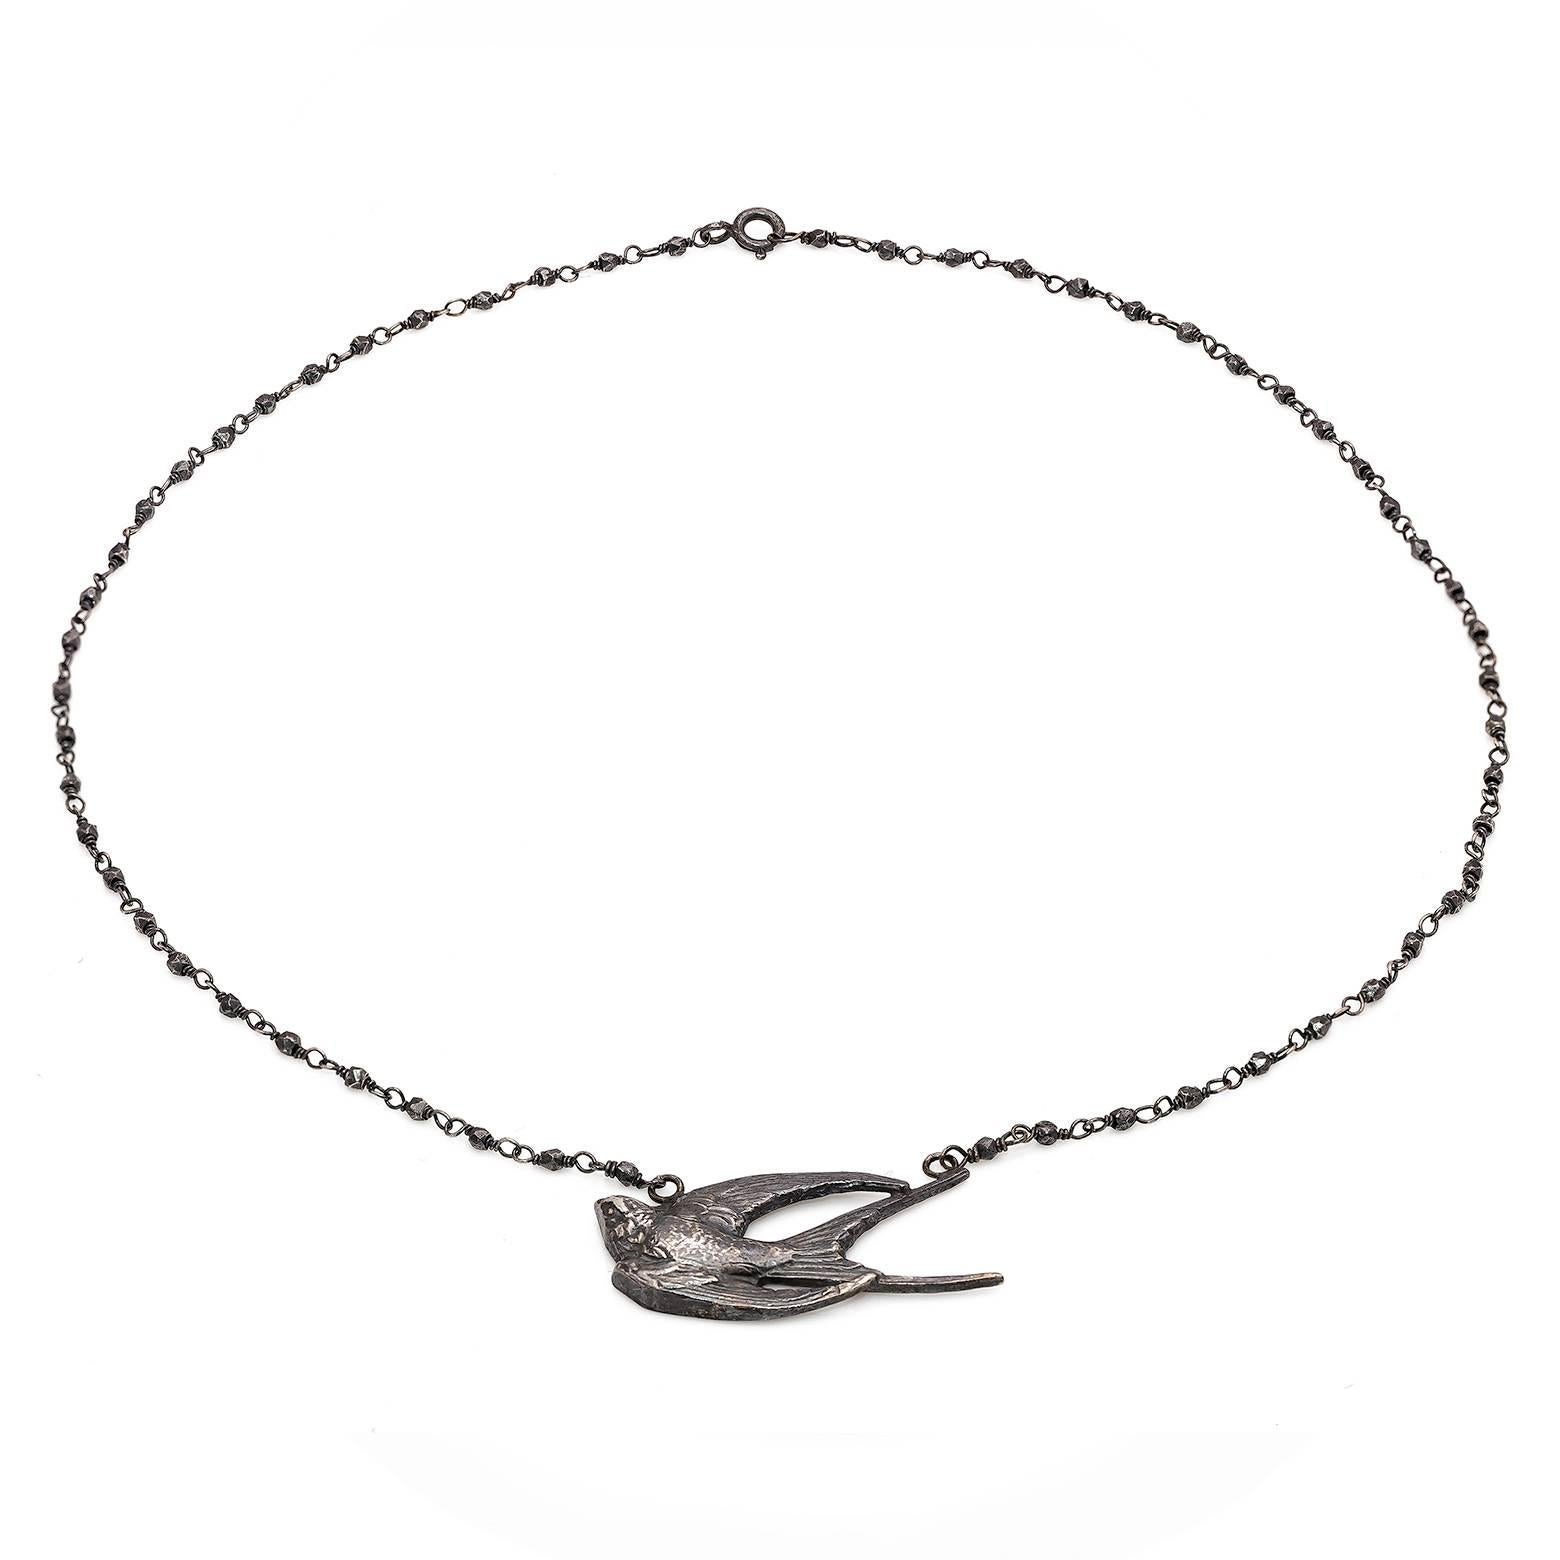 Soaring high this blackbird necklace is adorned with hematite beads along the oxidized sterling silver necklace. Artistic and magical and created here in the San Francisco Bay Area.